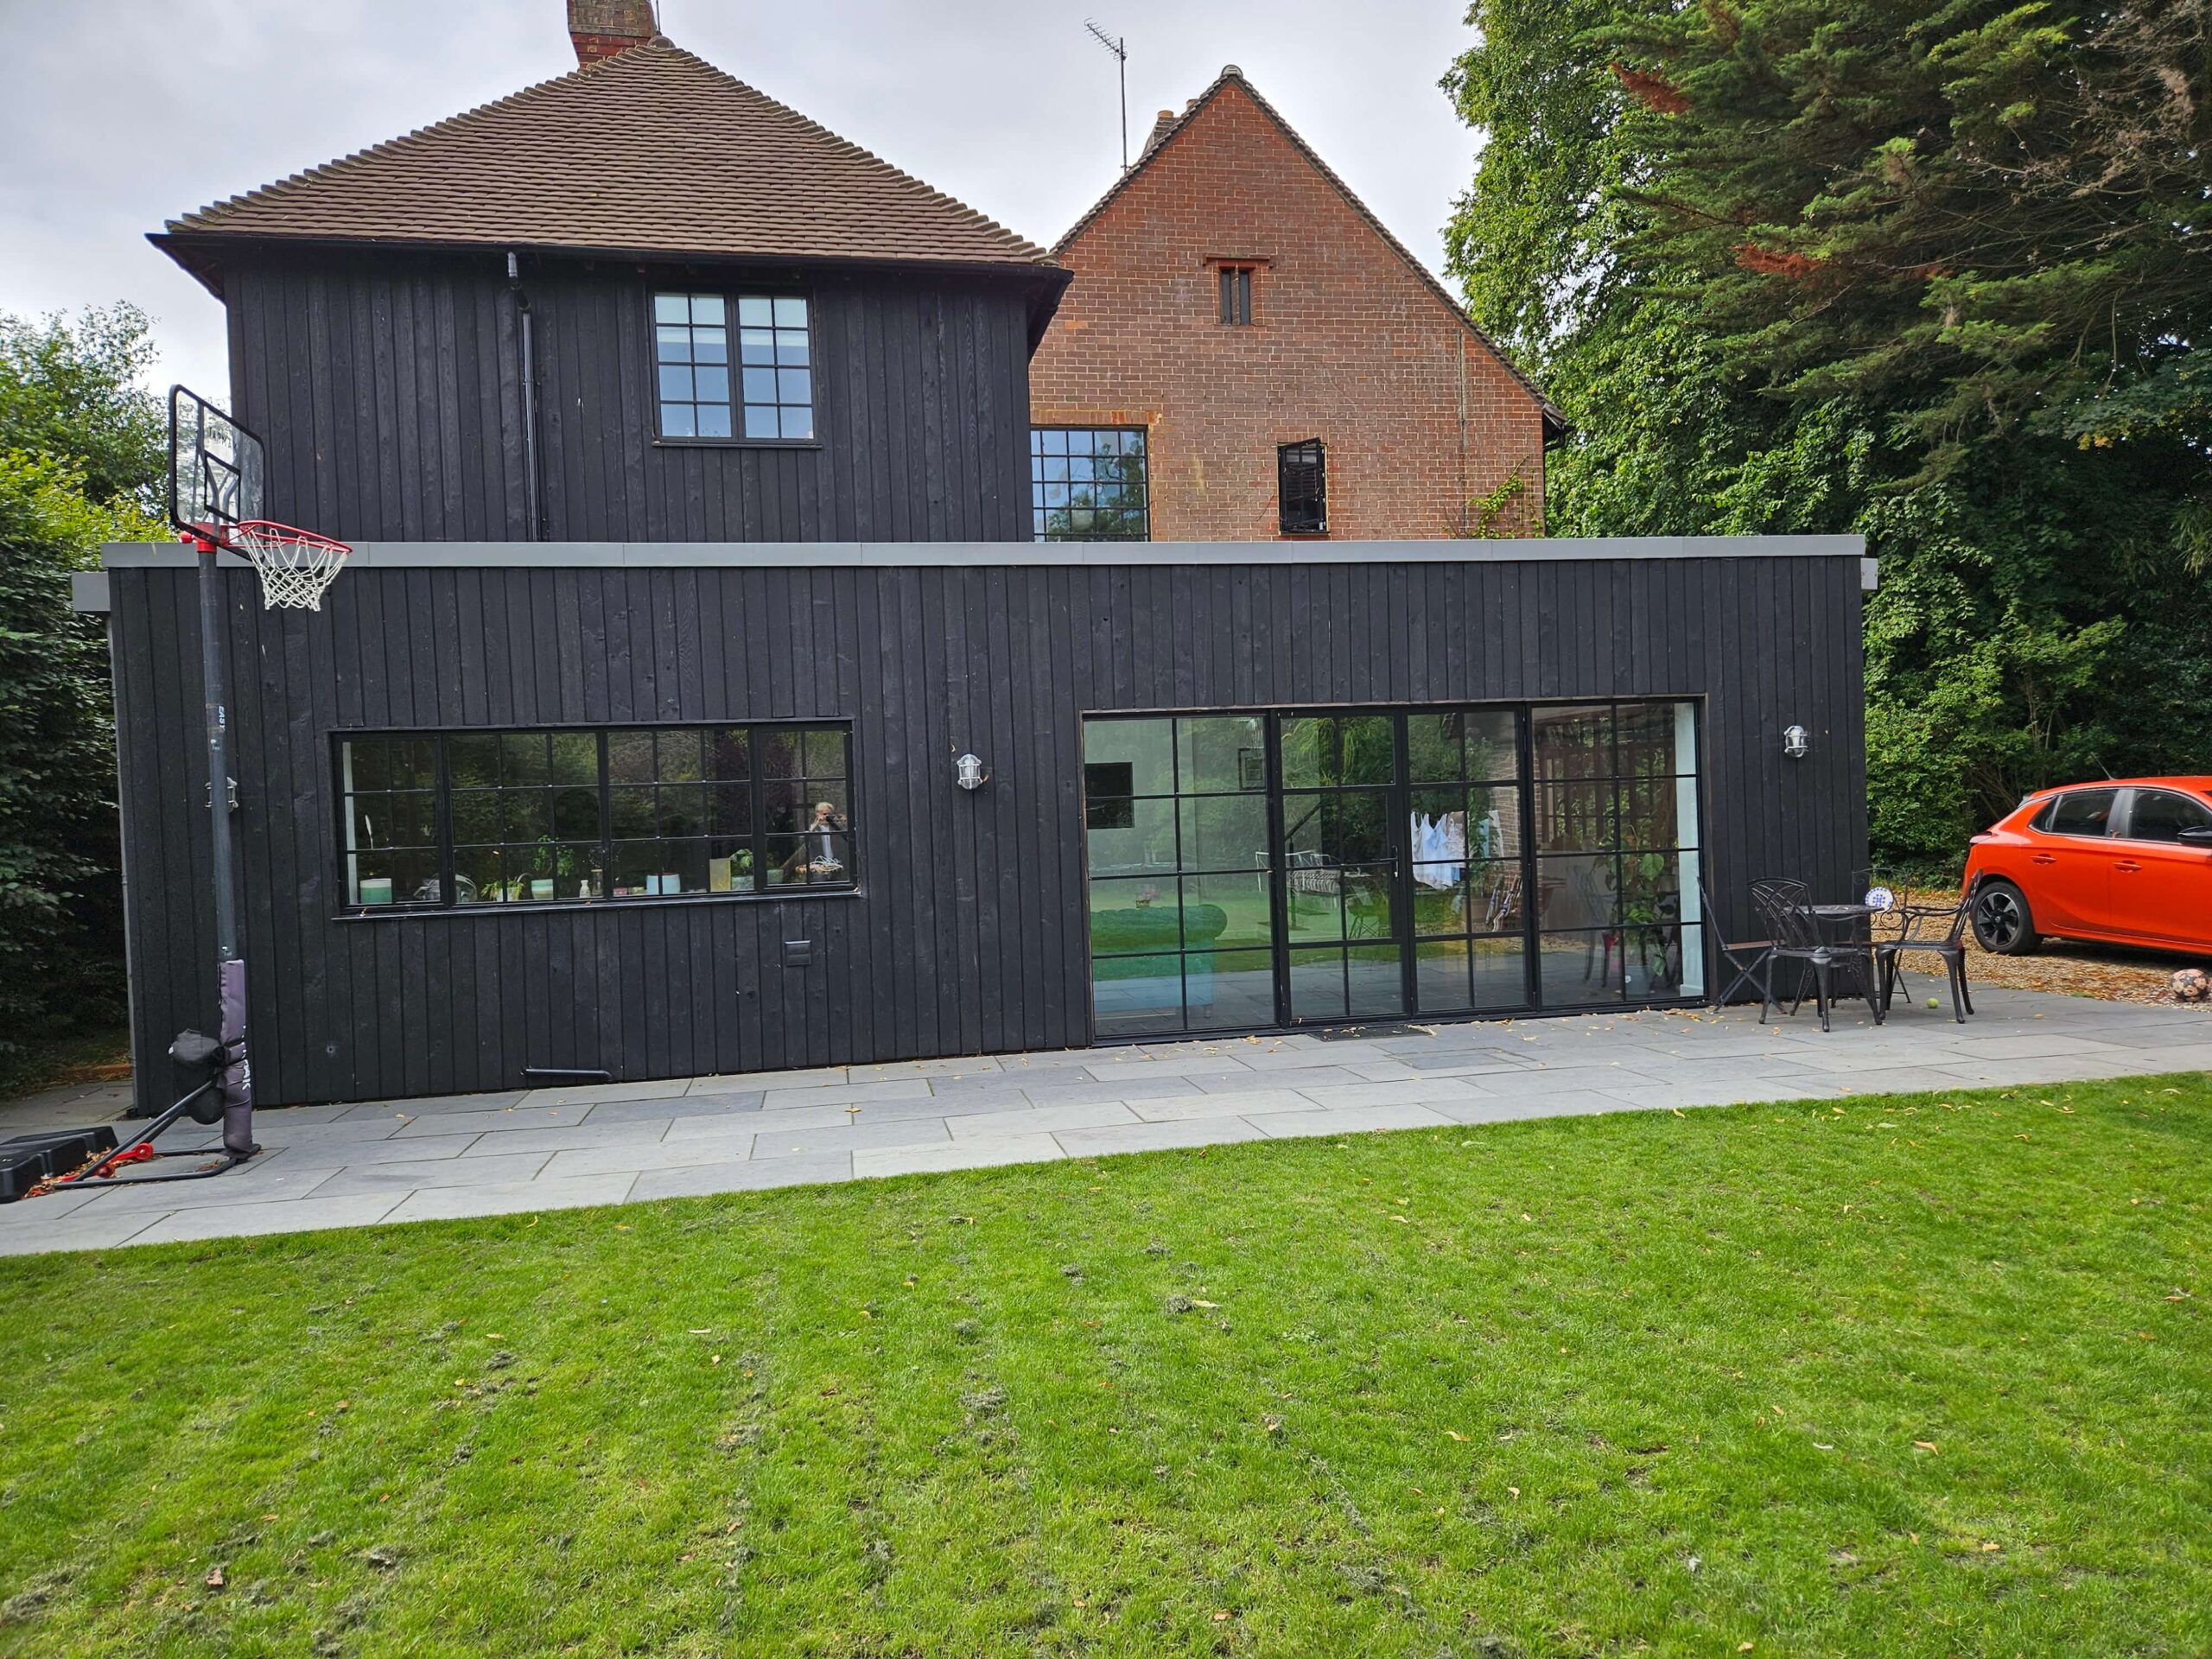 Rear extension example for architectural design services in the South East